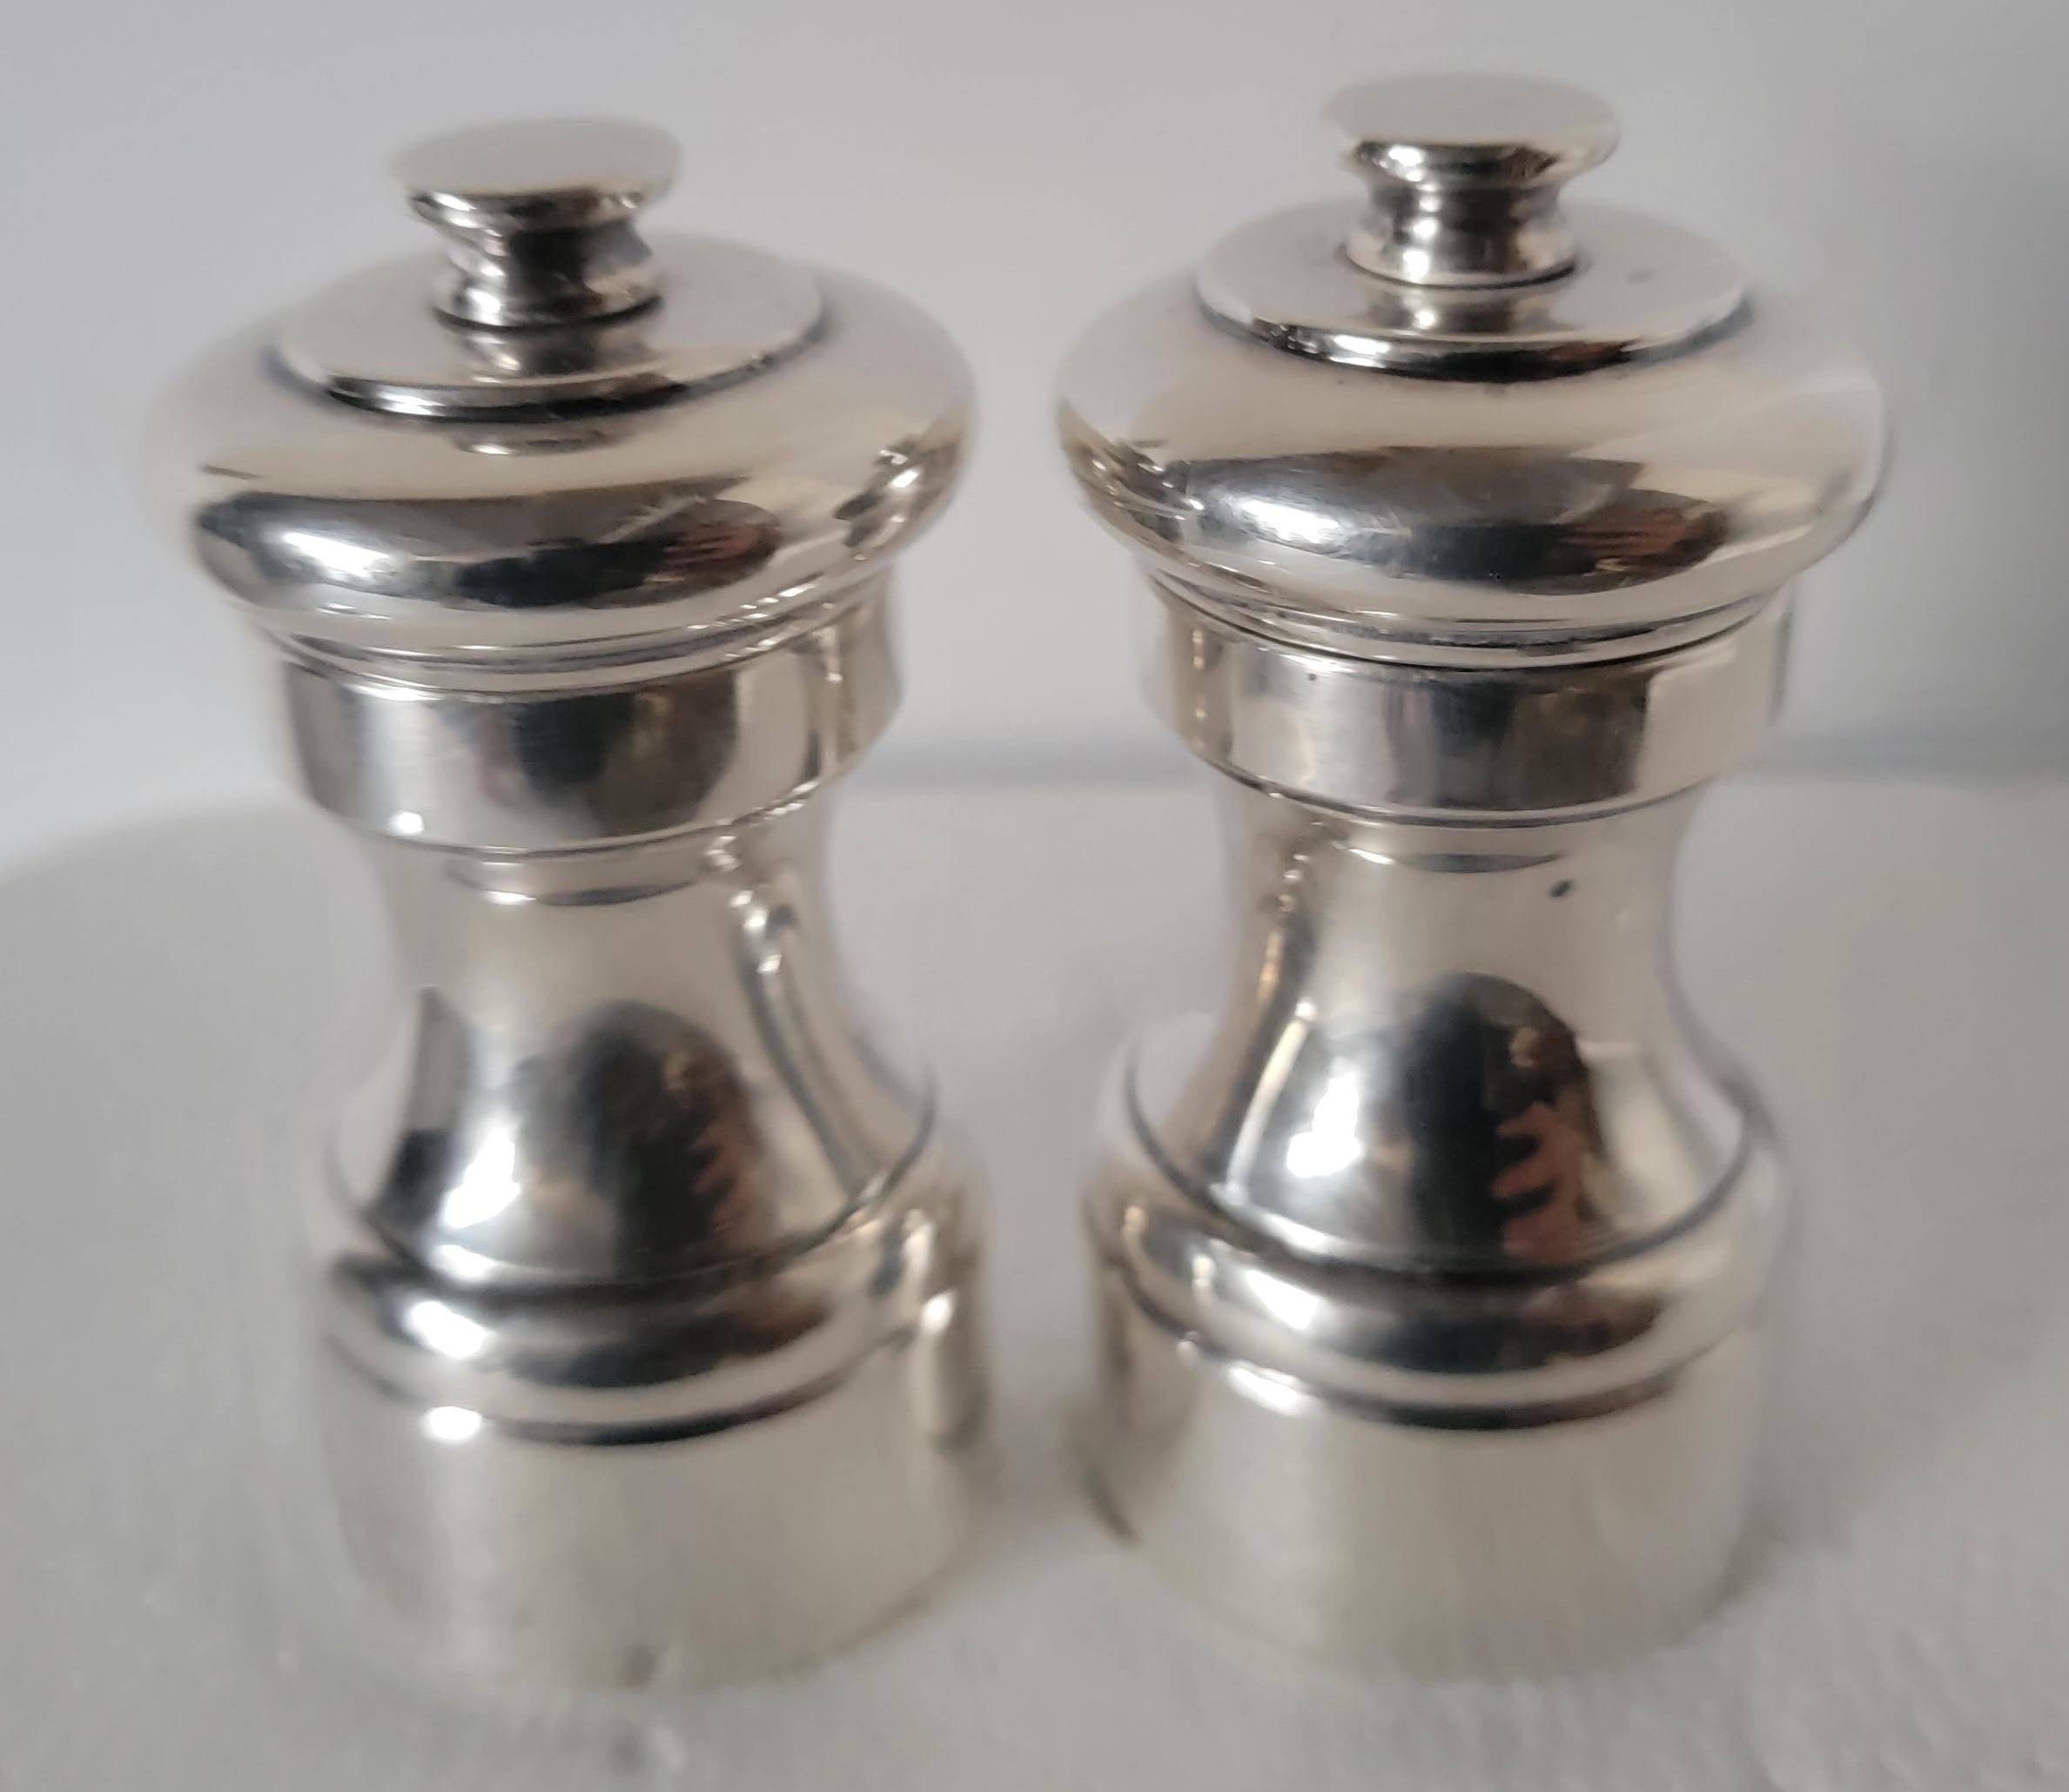 Very nice sterling silver salt and pepper grinders. Great Condition. Marked France.